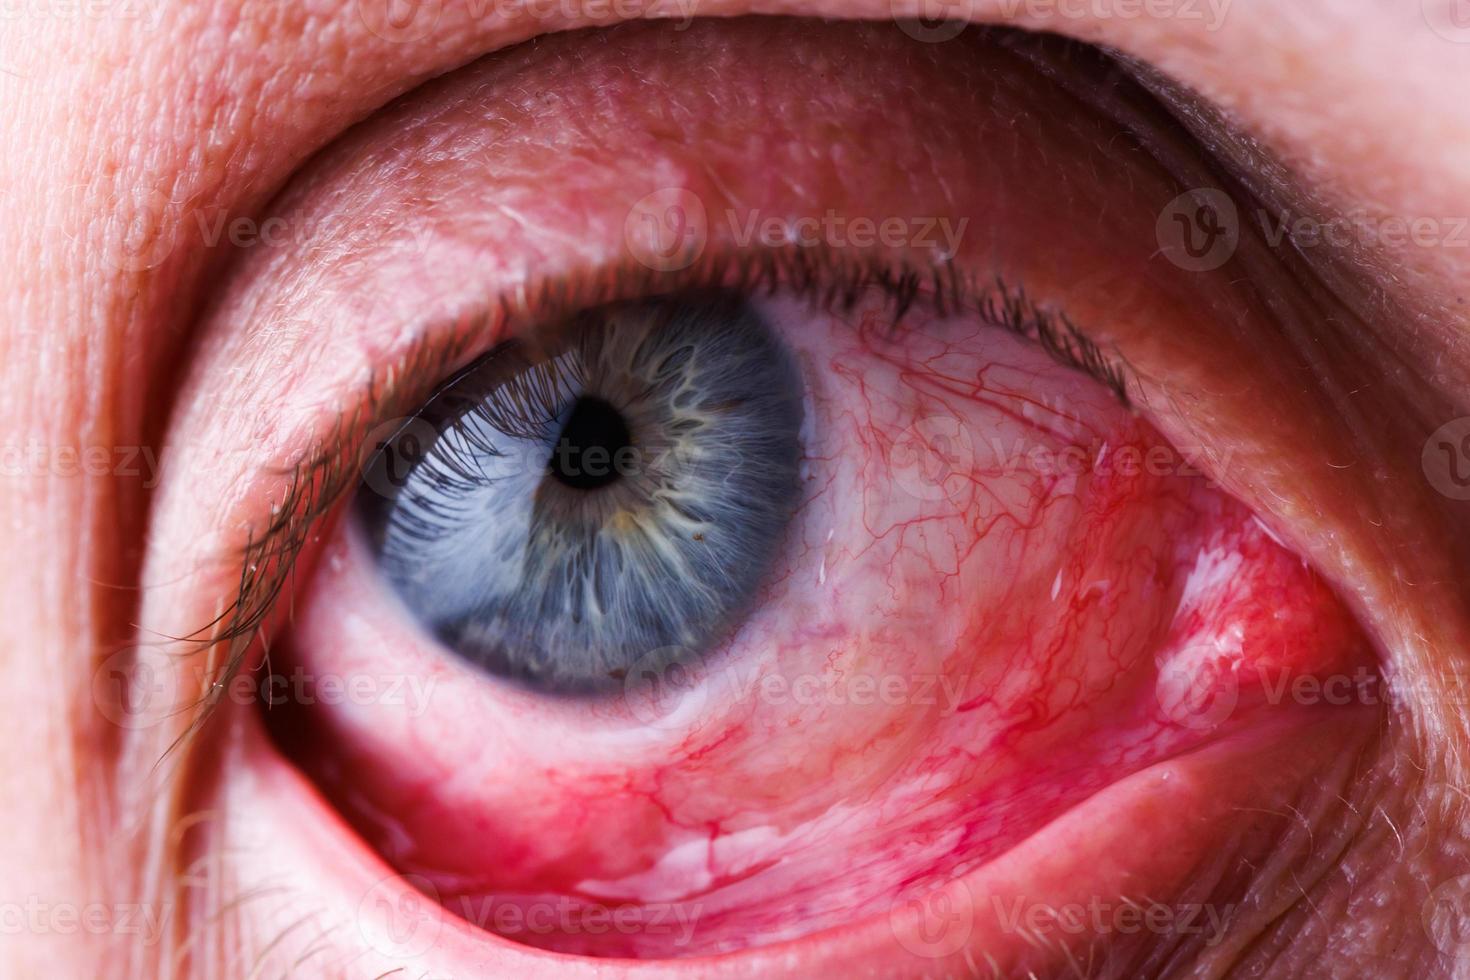 gray eye of caucasian male with red capillary mesh, lower eyelid pulled back photo